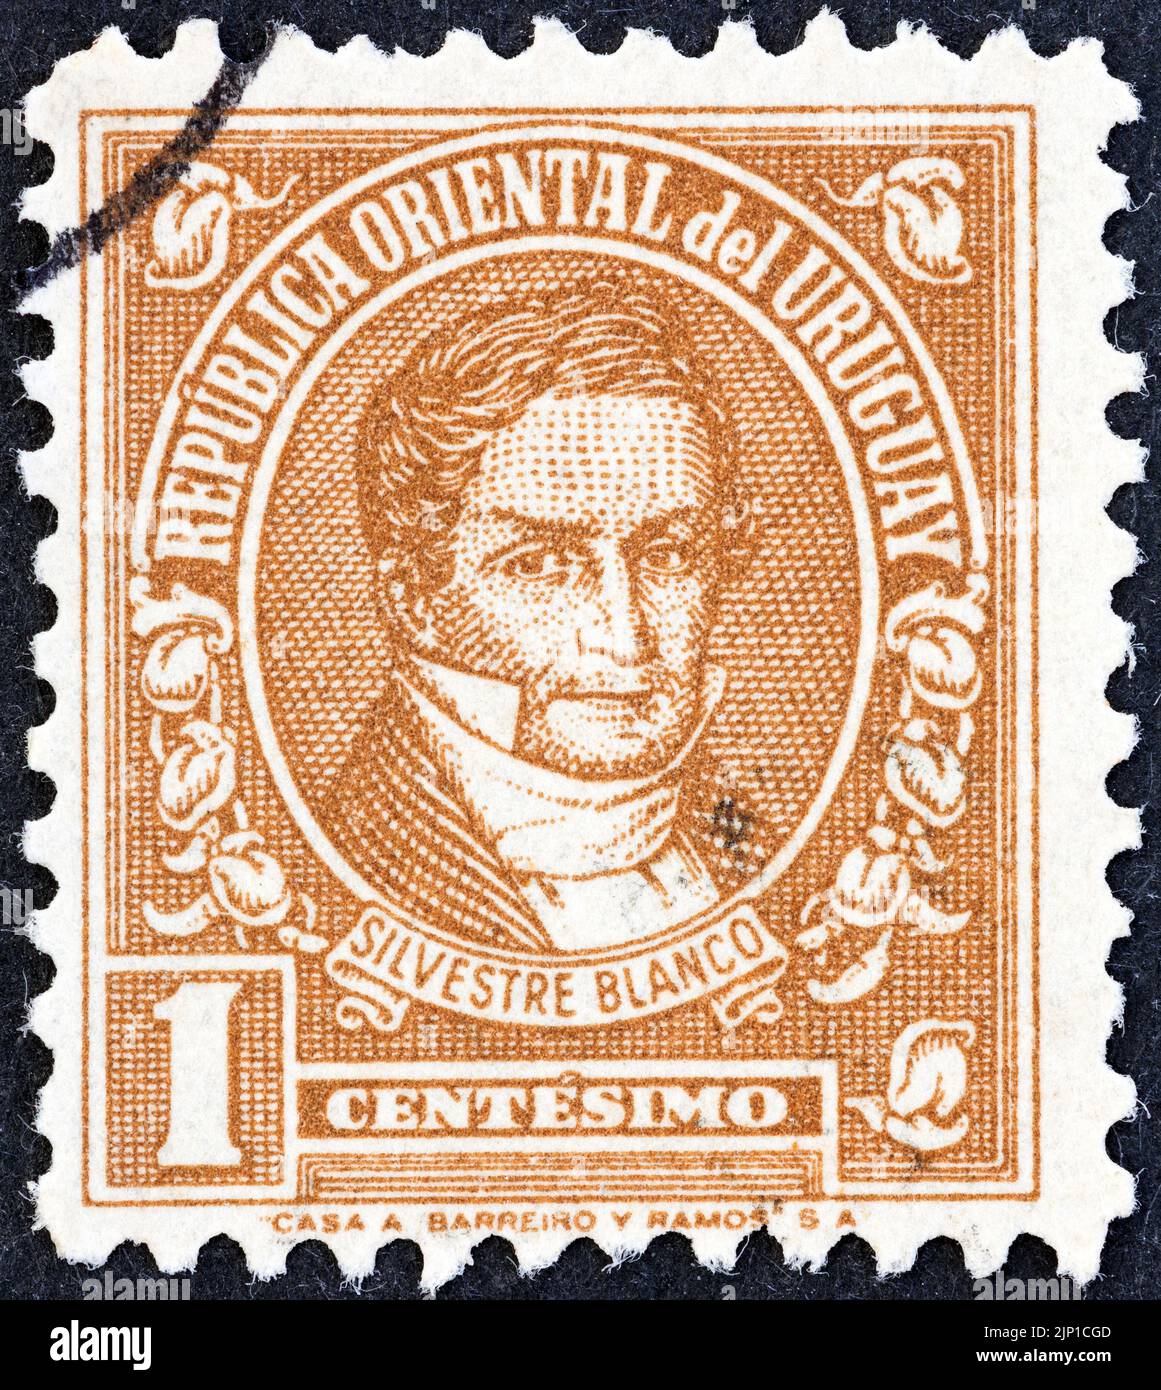 URUGUAY - CIRCA 1945: A stamp printed in Uruguay from the 'Personalities' issue shows Silvestre Blanco, 1783-1840, circa 1945. Stock Photo